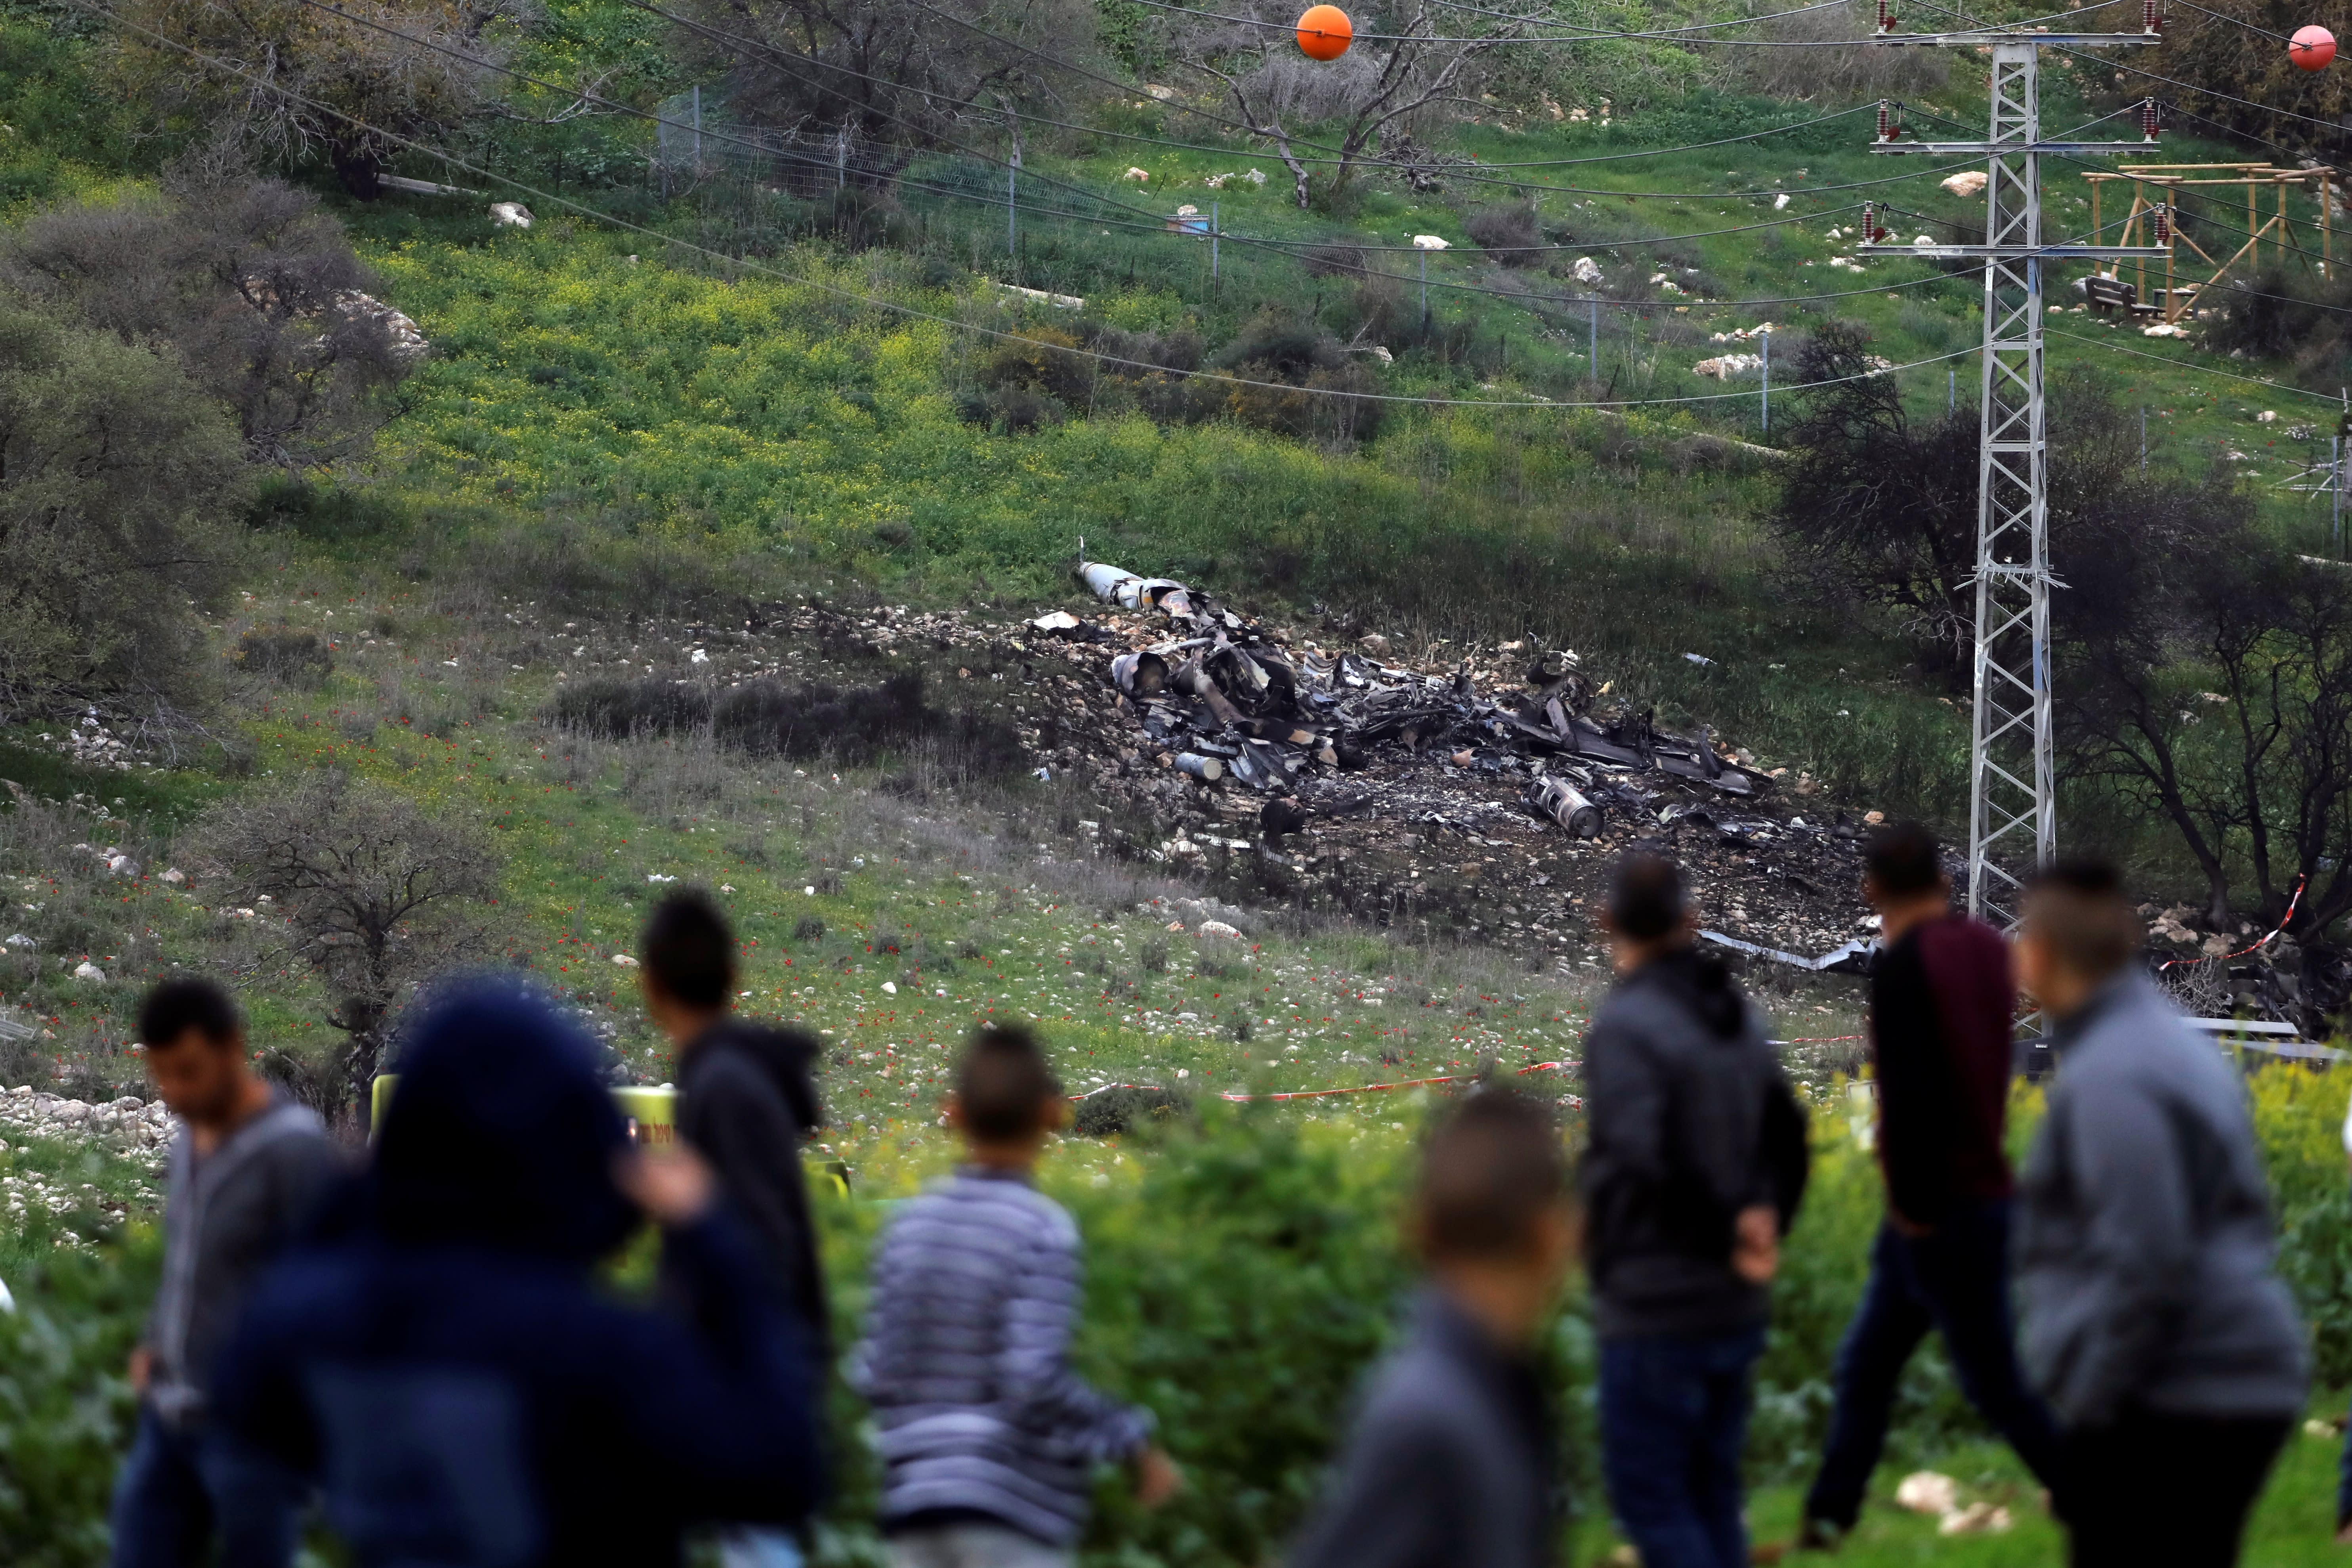 Bystanders look on at the remnants of an Israeli F-16 fighter jet shot down by Syrian forces, February 2018 (RONEN ZVULUN/ REUTERS)